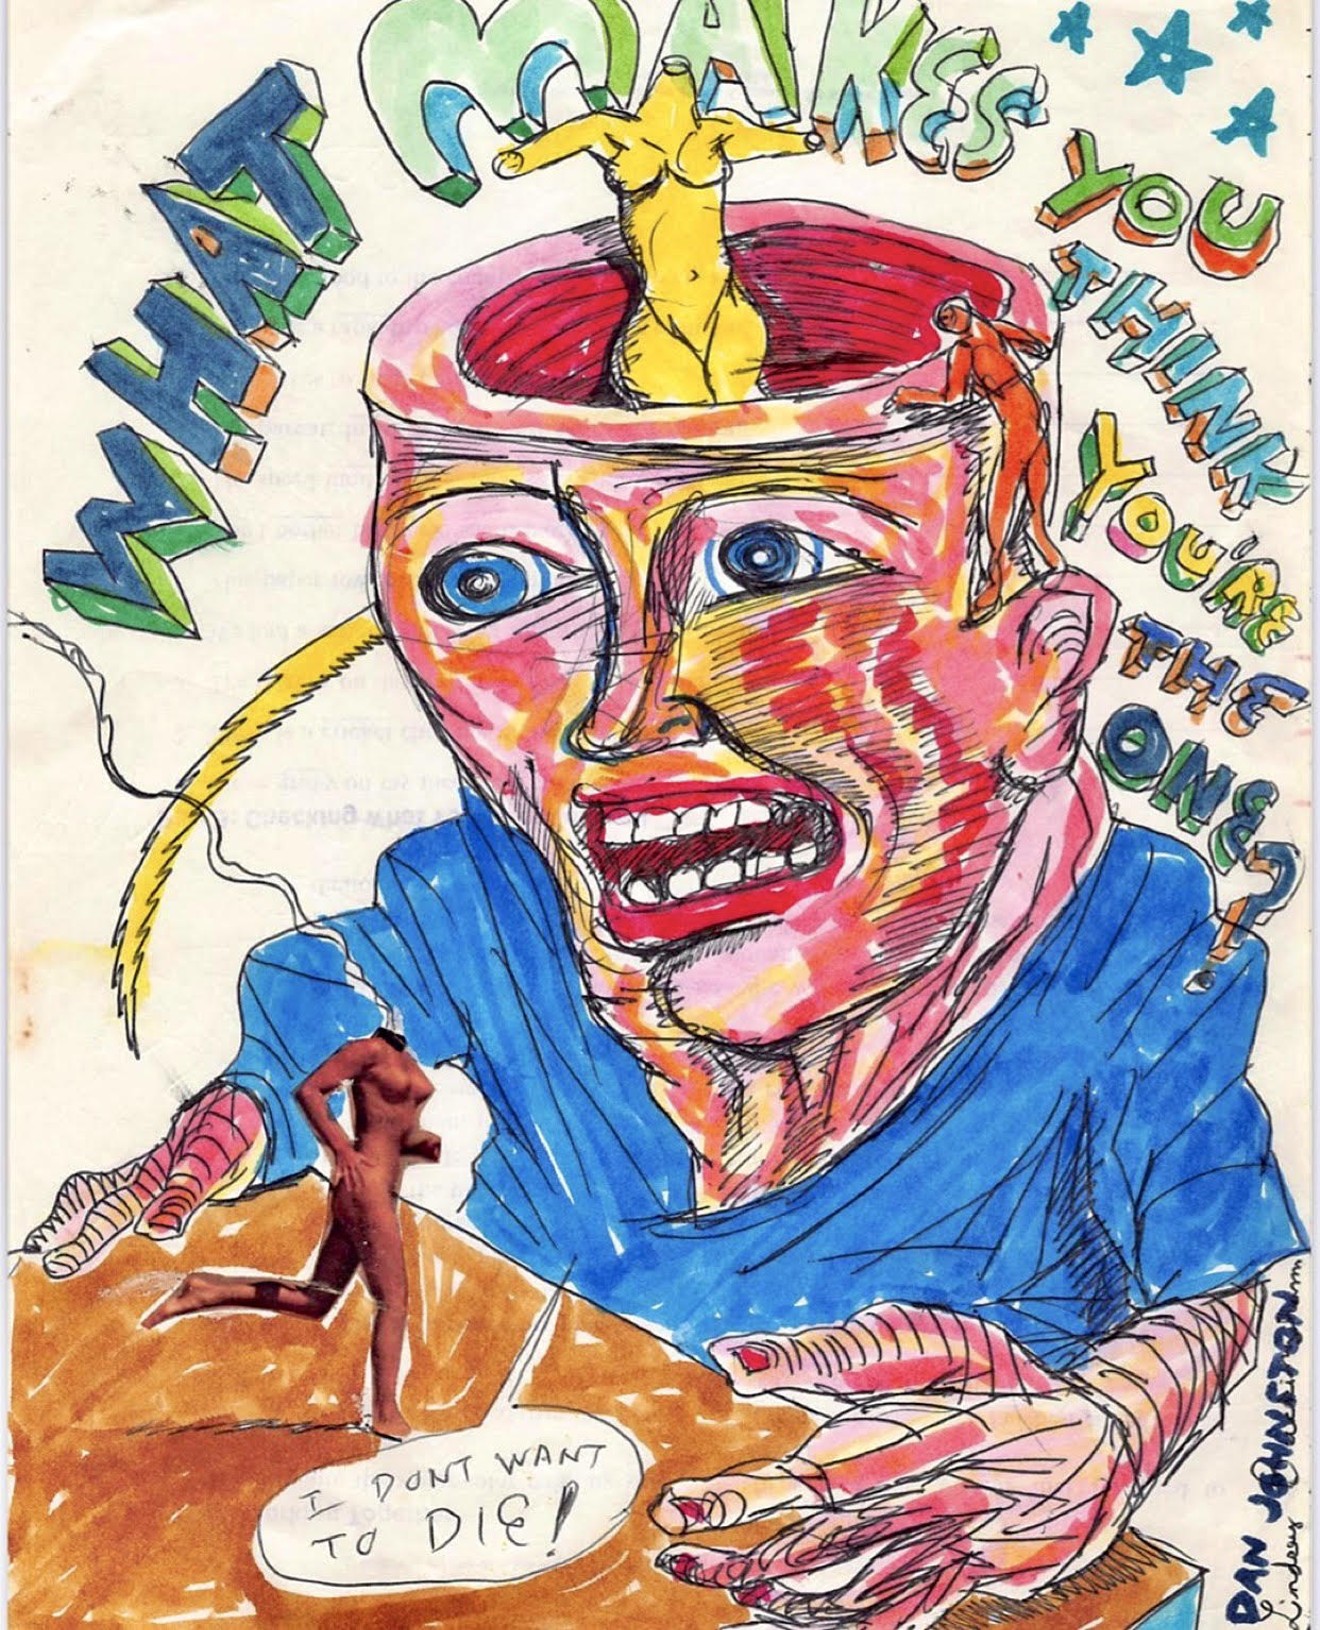 This 1978 Daniel Johnston drawing, "What Makes You Think You're the One?" is one of the hundreds of works on display at the Ro2 Art gallery from now until July 31.